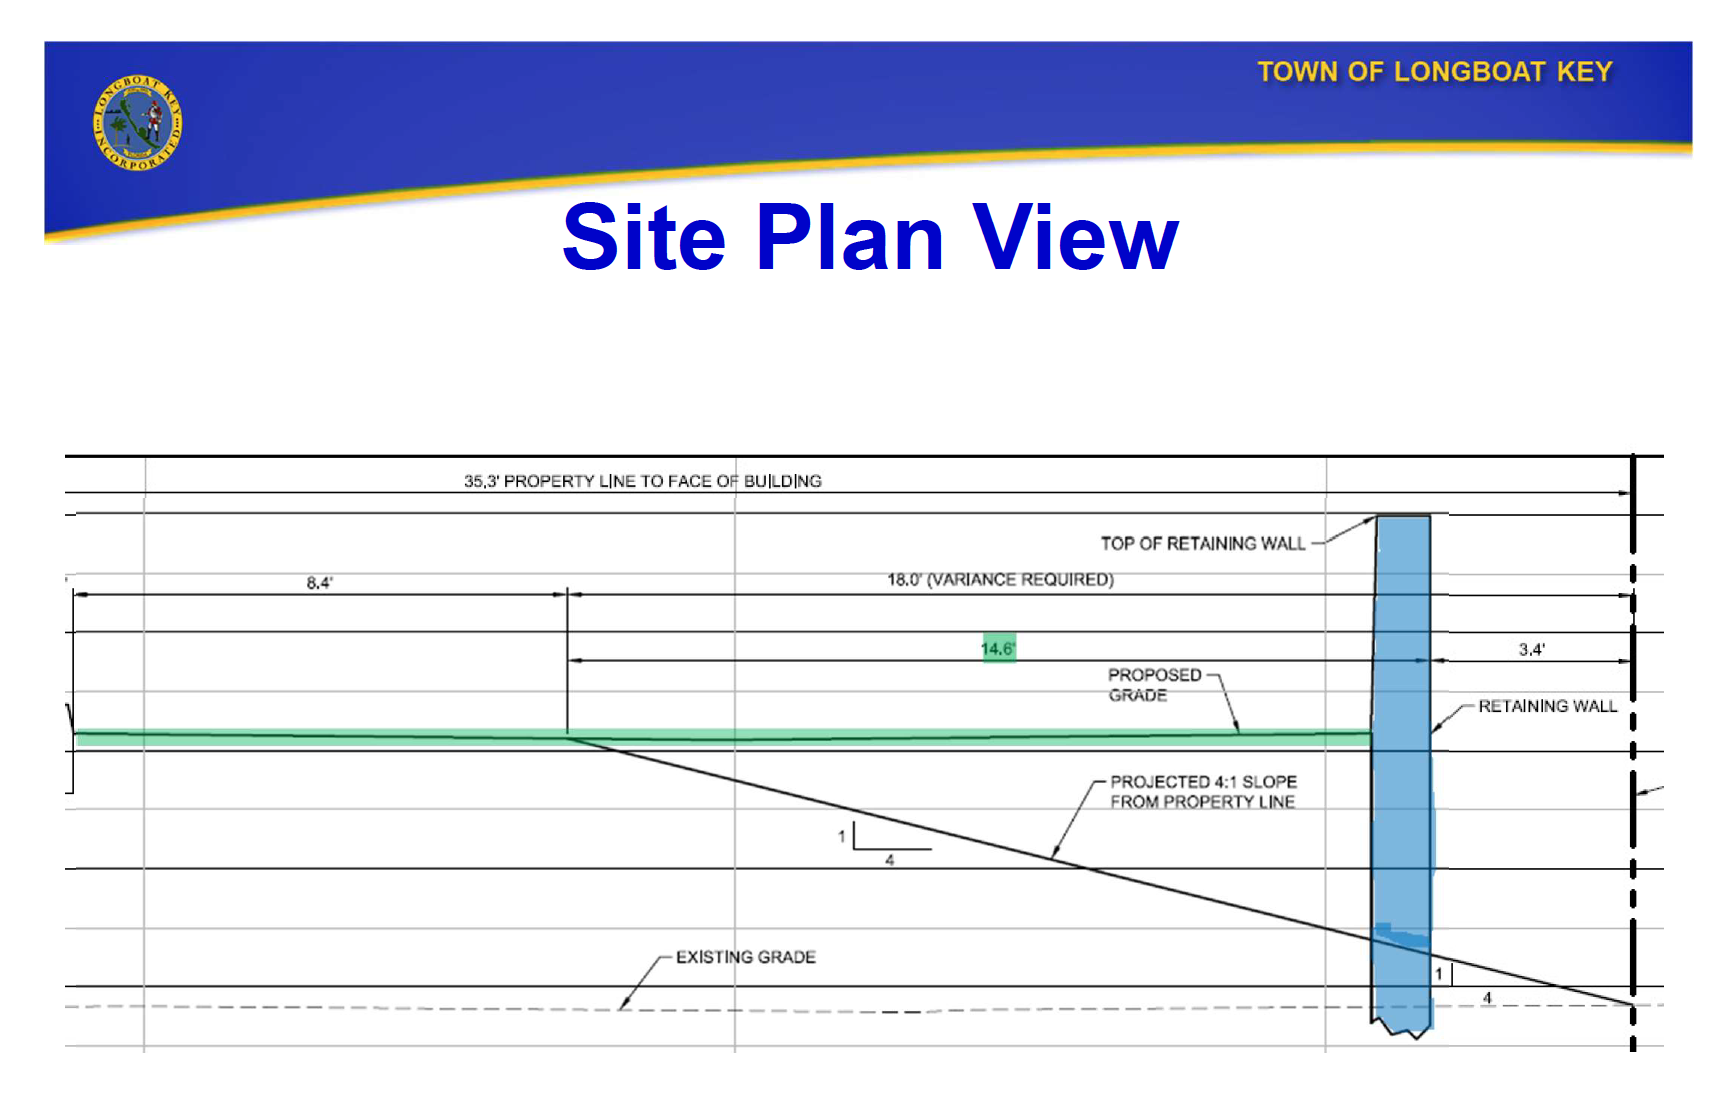 A site plan view shows the specifications of why the town requested a variance to its code.